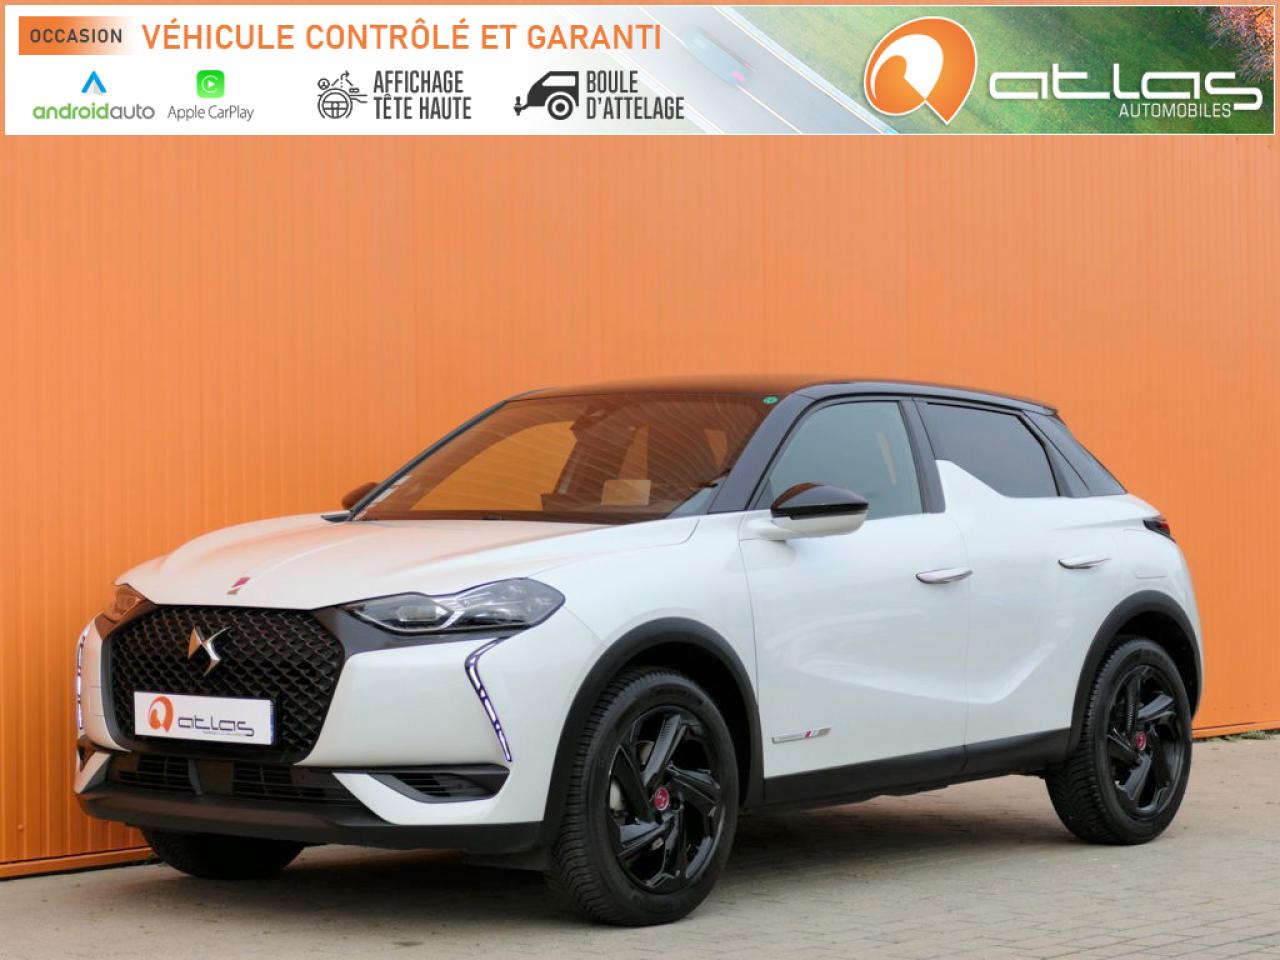 2019 Ds DS3 CROSSBACK